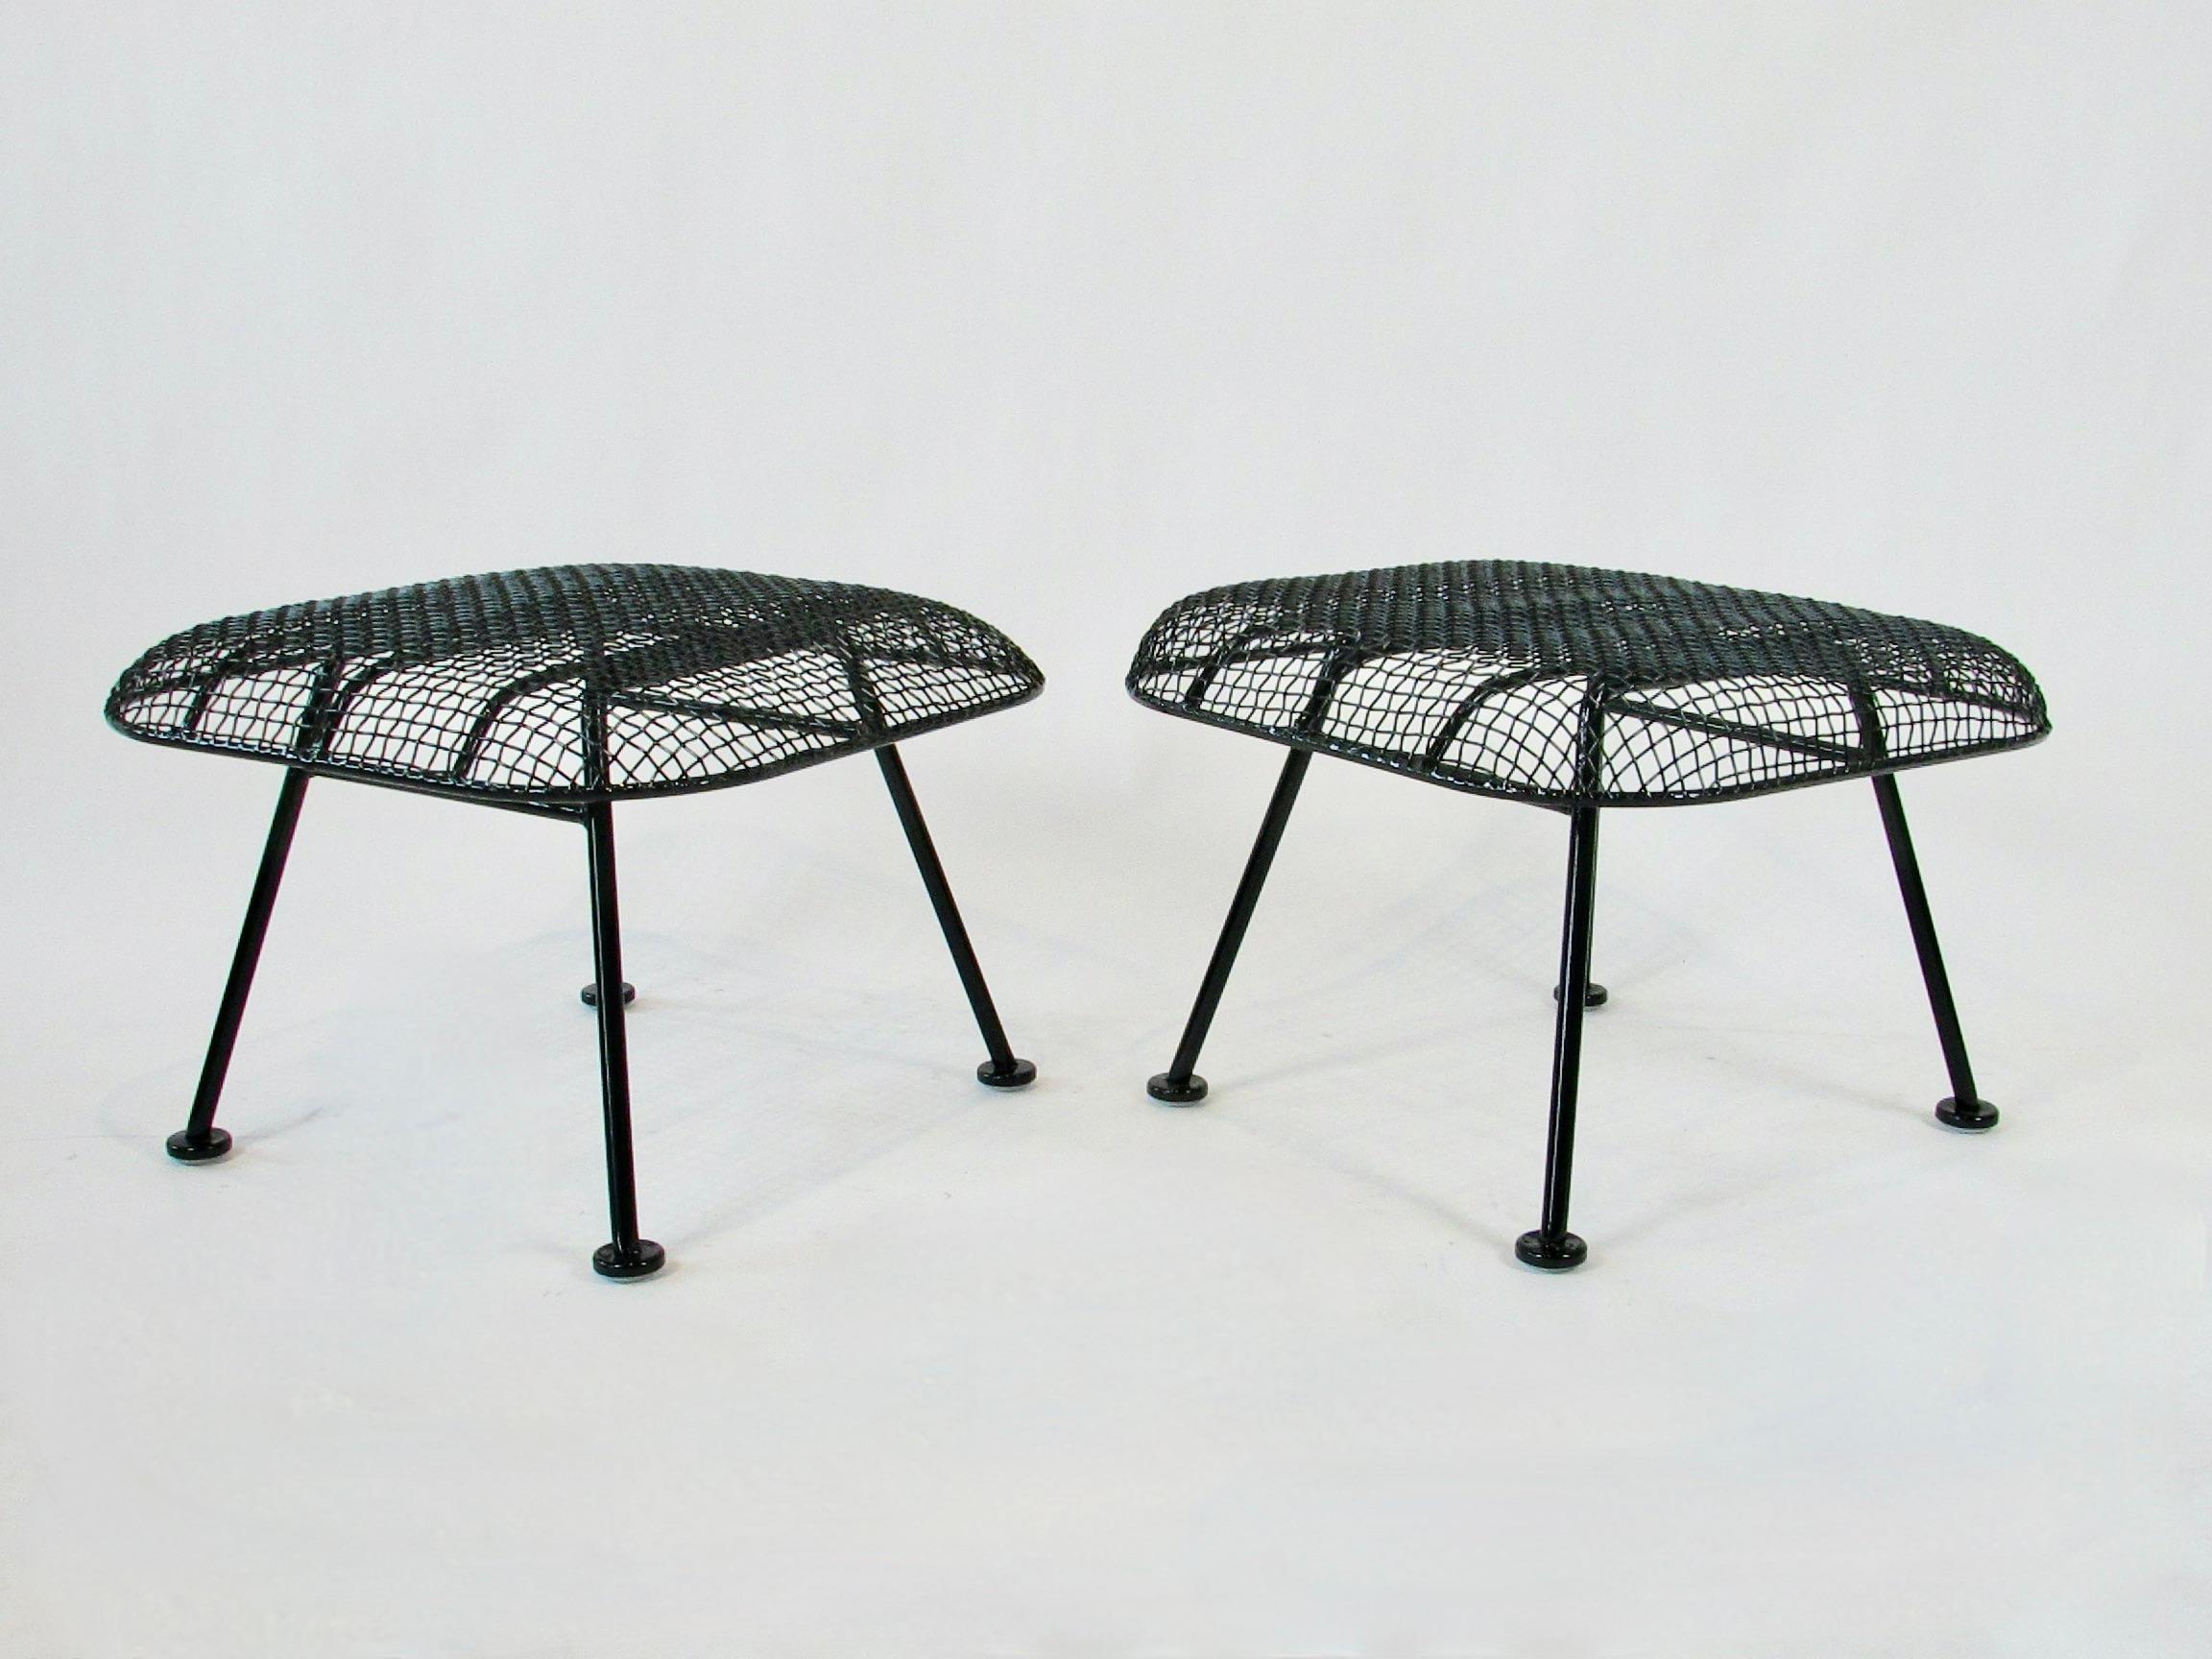 Pair of Woodard Wrought Iron with Steel Mesh Ottomans In Good Condition For Sale In Ferndale, MI